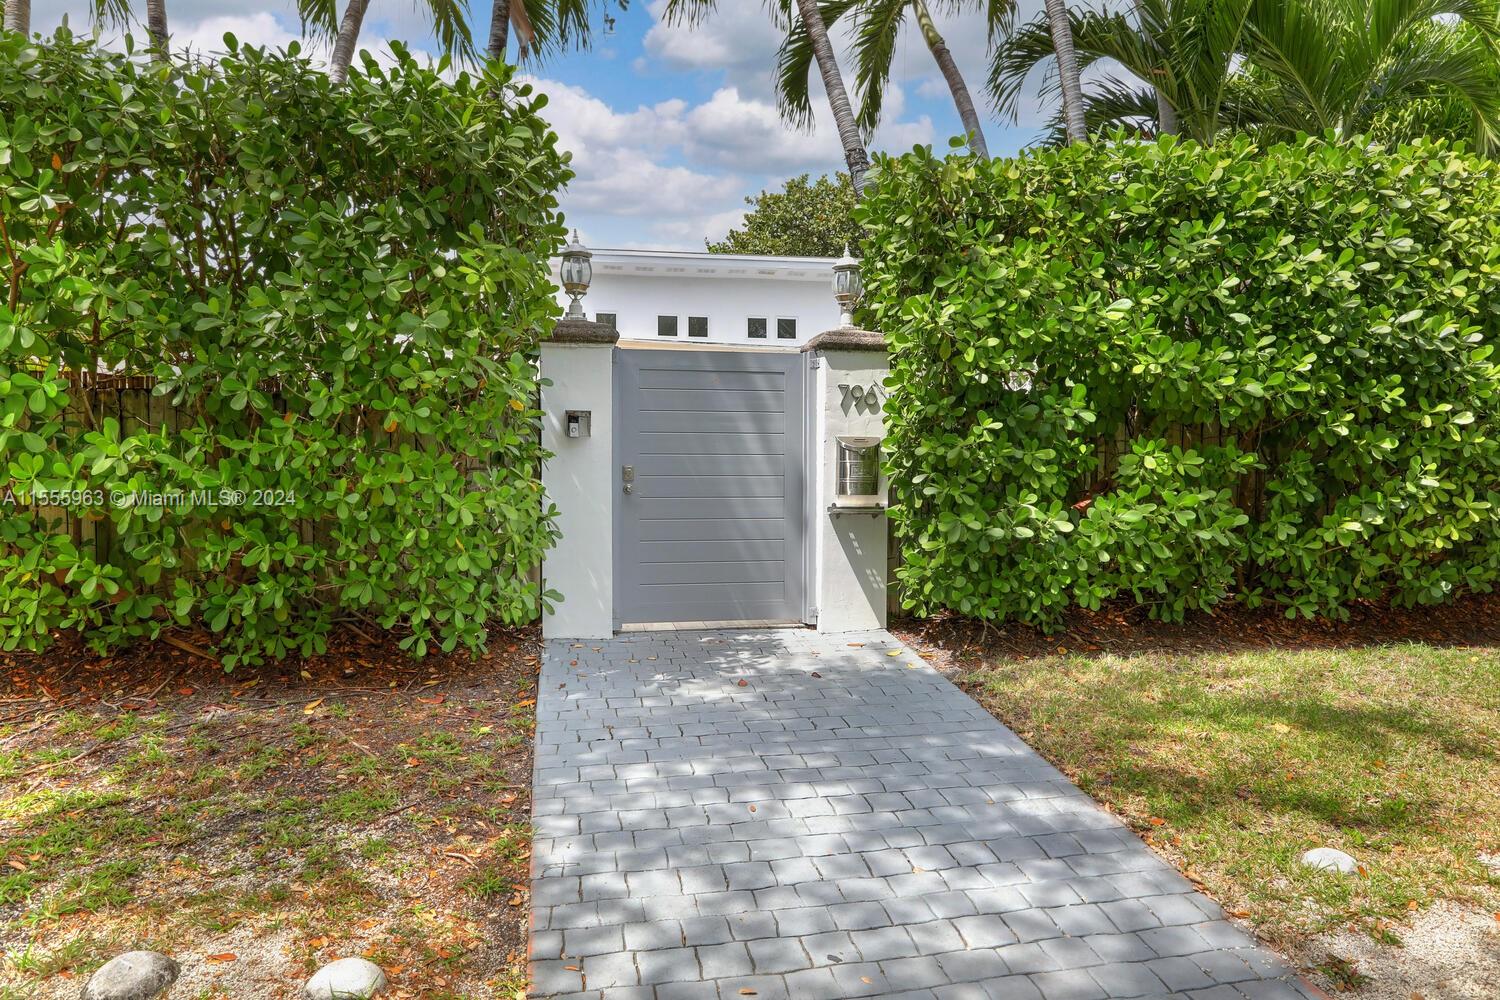 Address Not Disclosed, Key Biscayne, Miami-Dade County, Florida - 4 Bedrooms  
4 Bathrooms - 